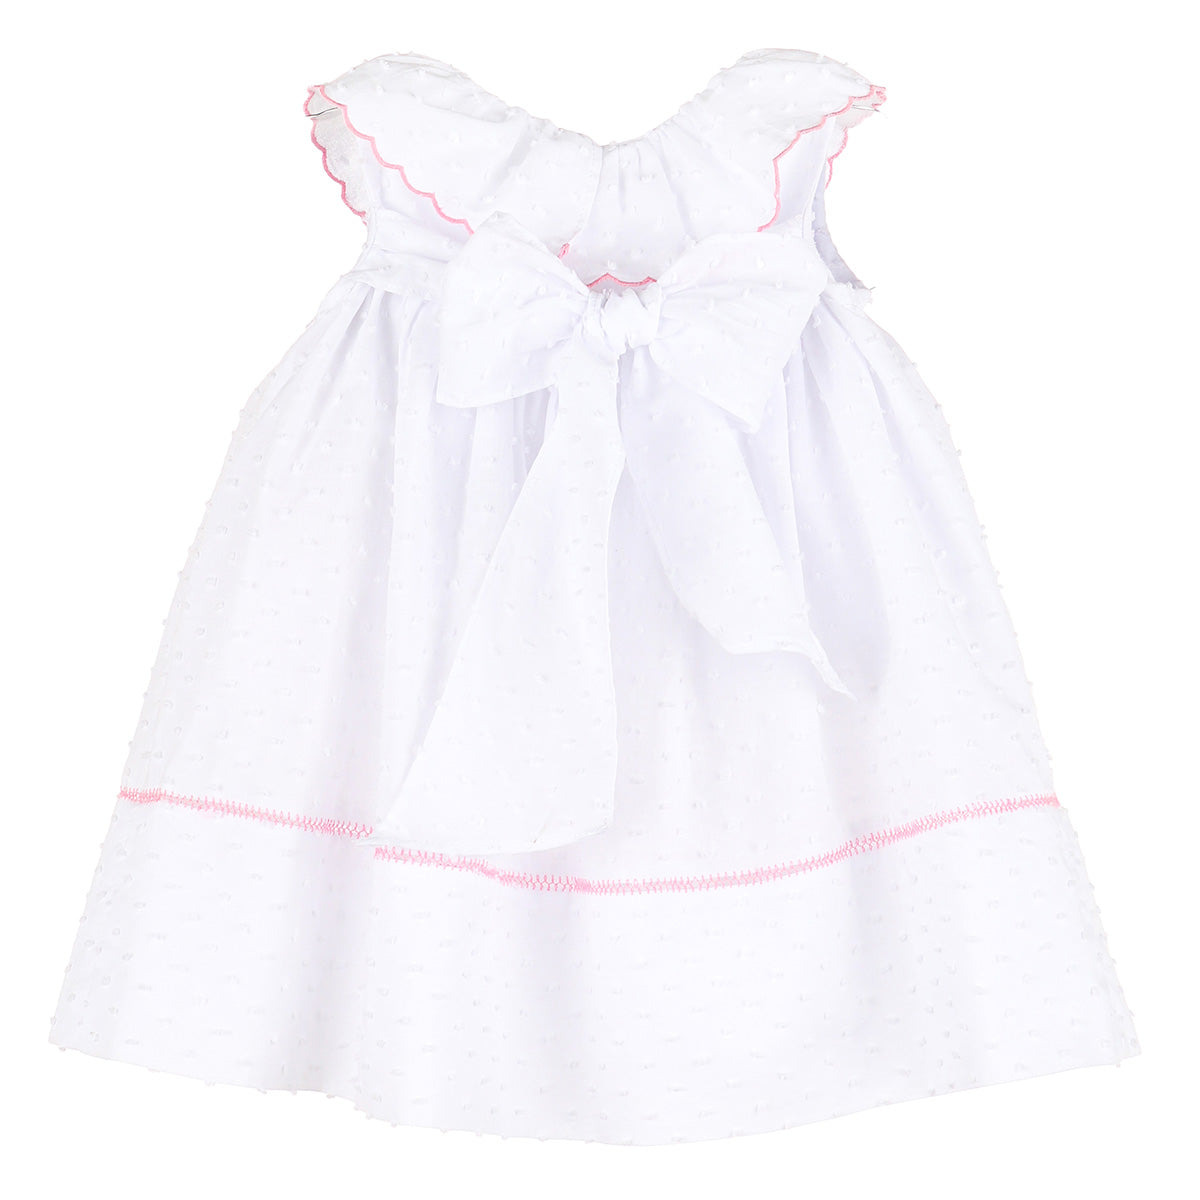 Little Girl's Embroidered Lawn Party Ruffle Dress Sophie and Lucas